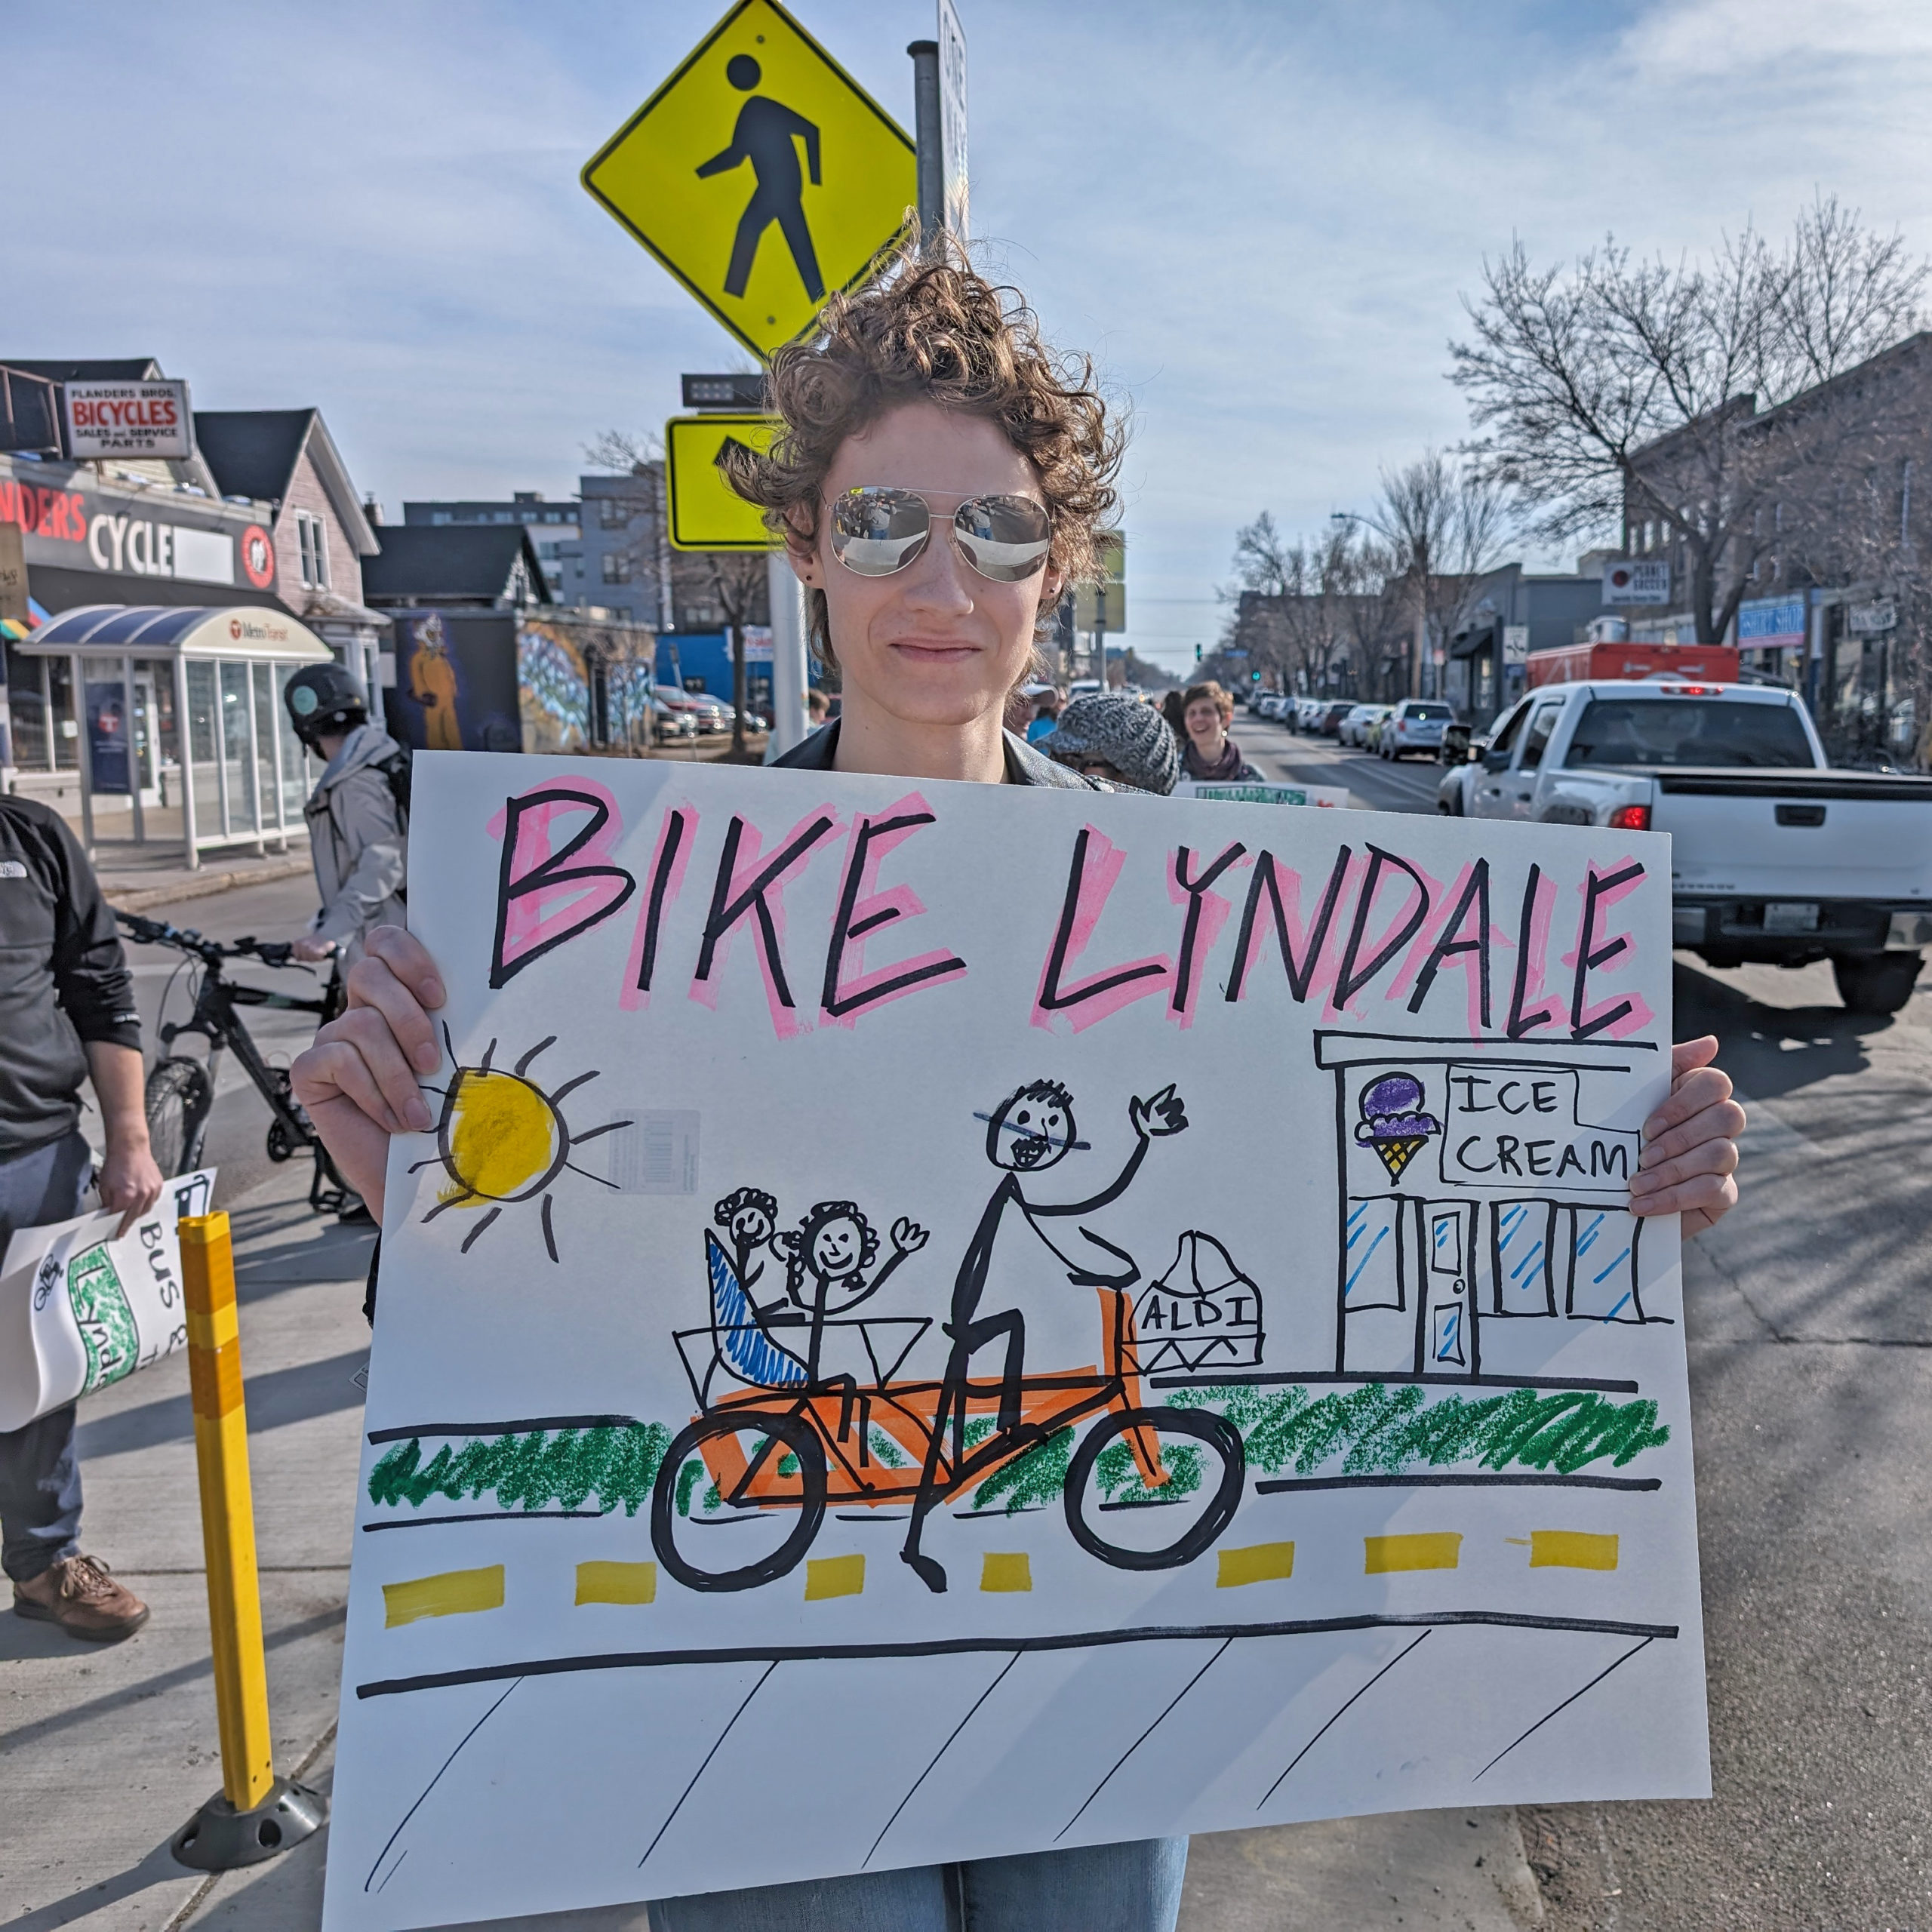 A community member at the Livable Lyndale rally in Minneapolis holds a hand-drawn sign that says Bike Lyndale. The sign features a drawing of an adult and two kids riding a cargo bike together on a separated bike lane and ice cream shop in the distance.